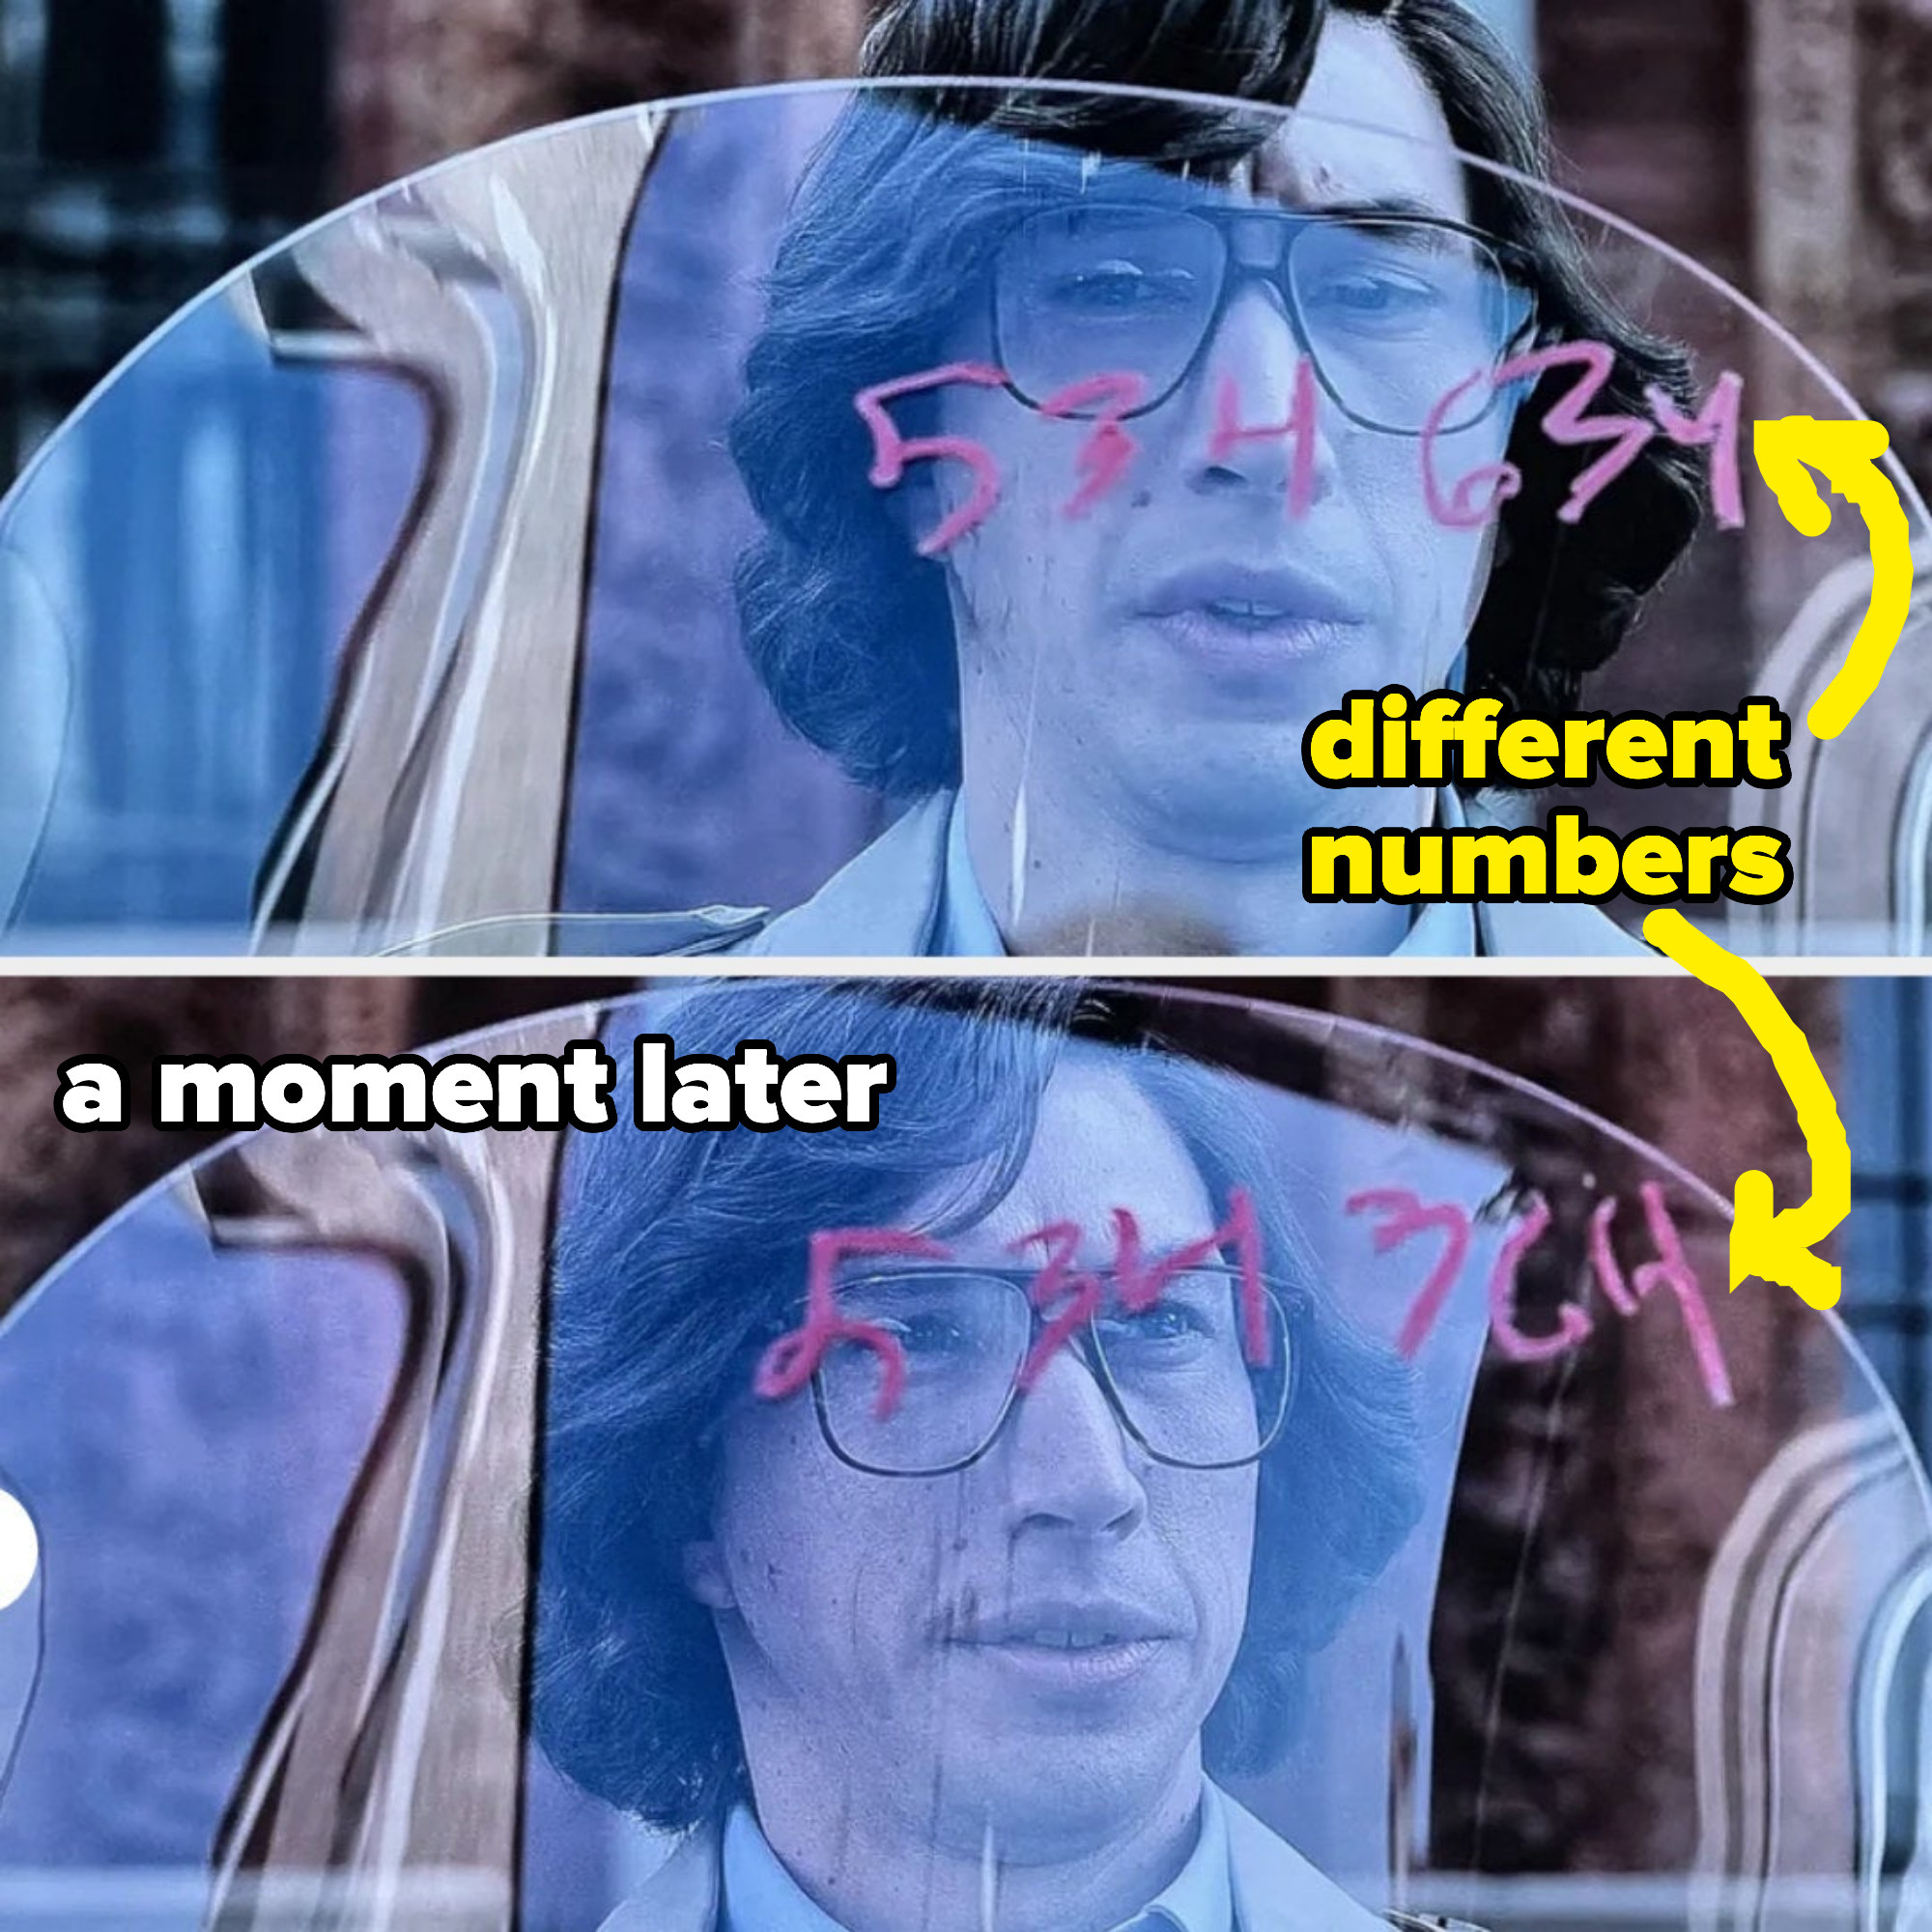 A character is looking at a piece of glass that has numbers written on it, and the numbers change halfway through the scene